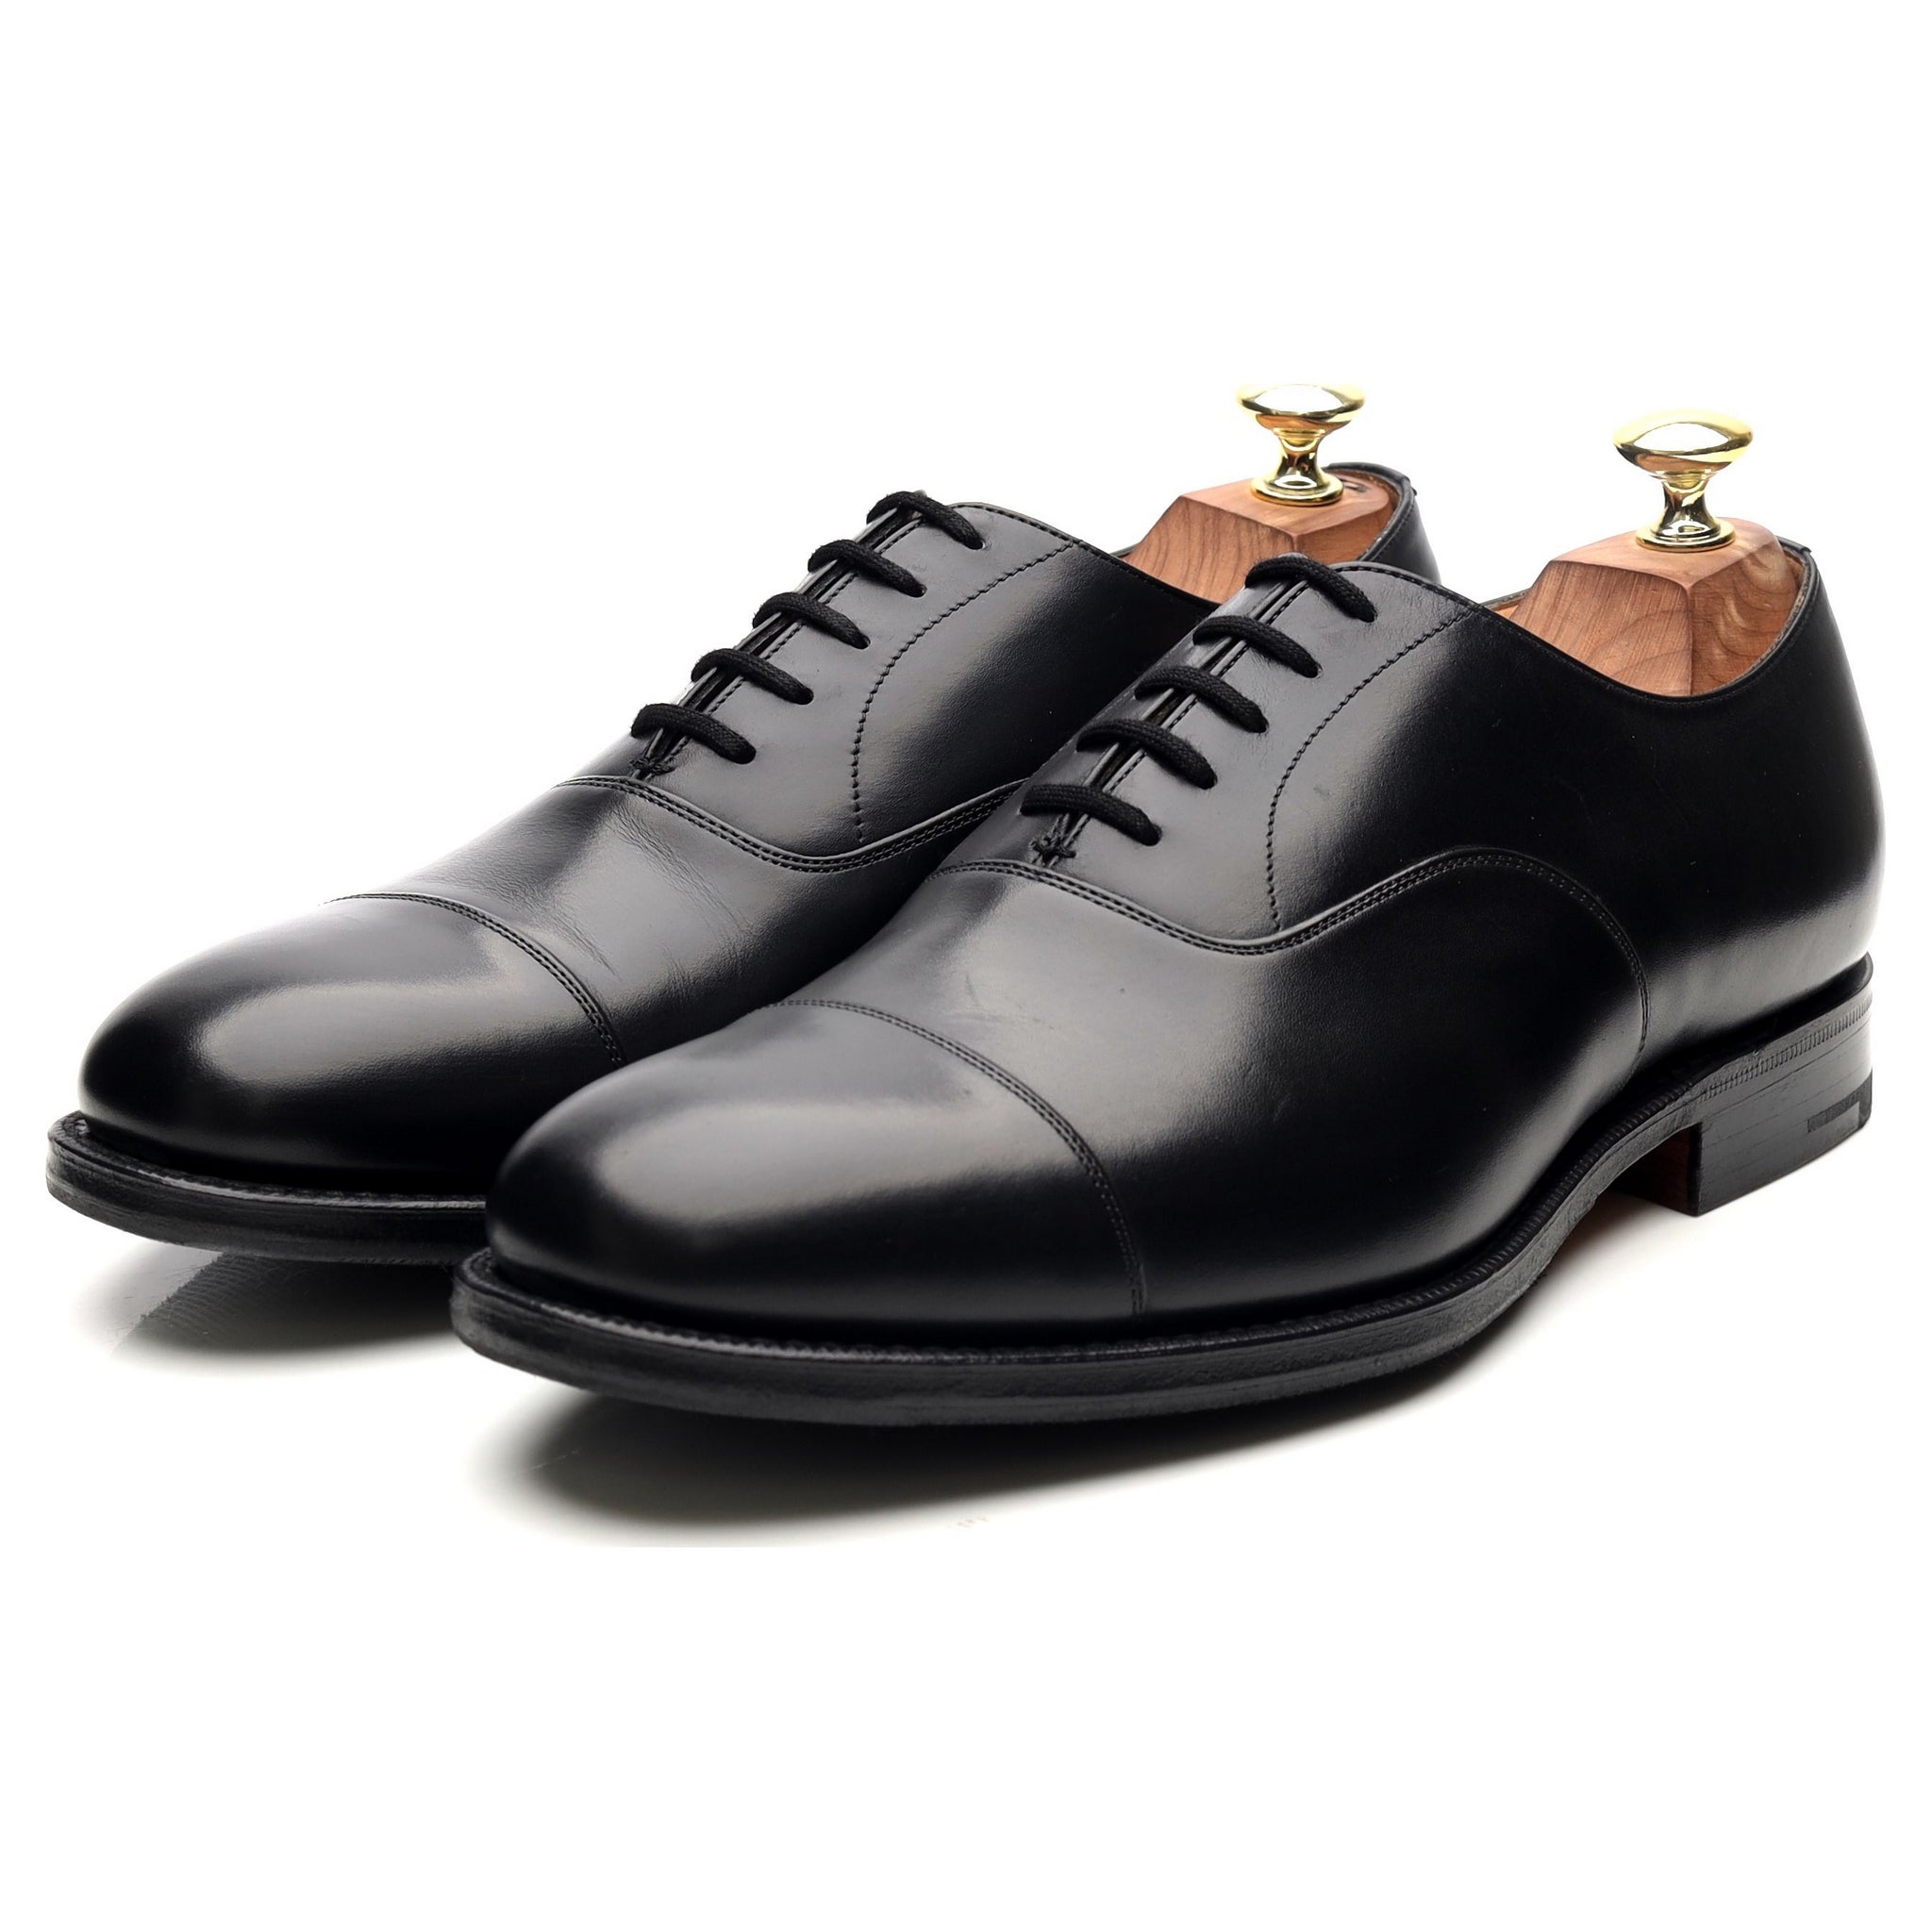 Balmoral' Black Leather Oxford UK 7.5 G - Abbot's Shoes